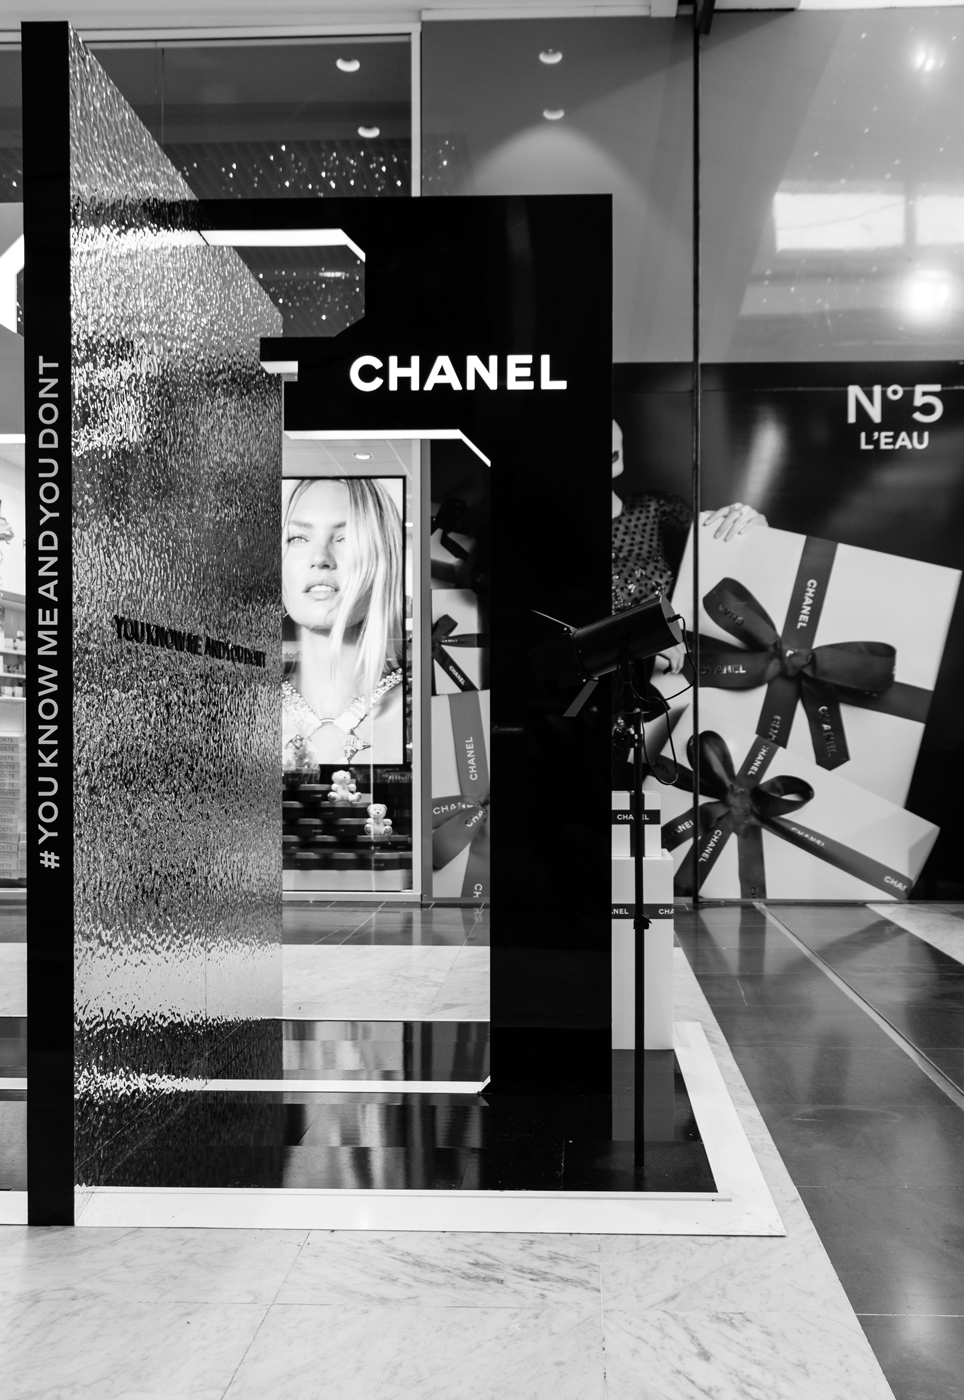 Stand Chanel